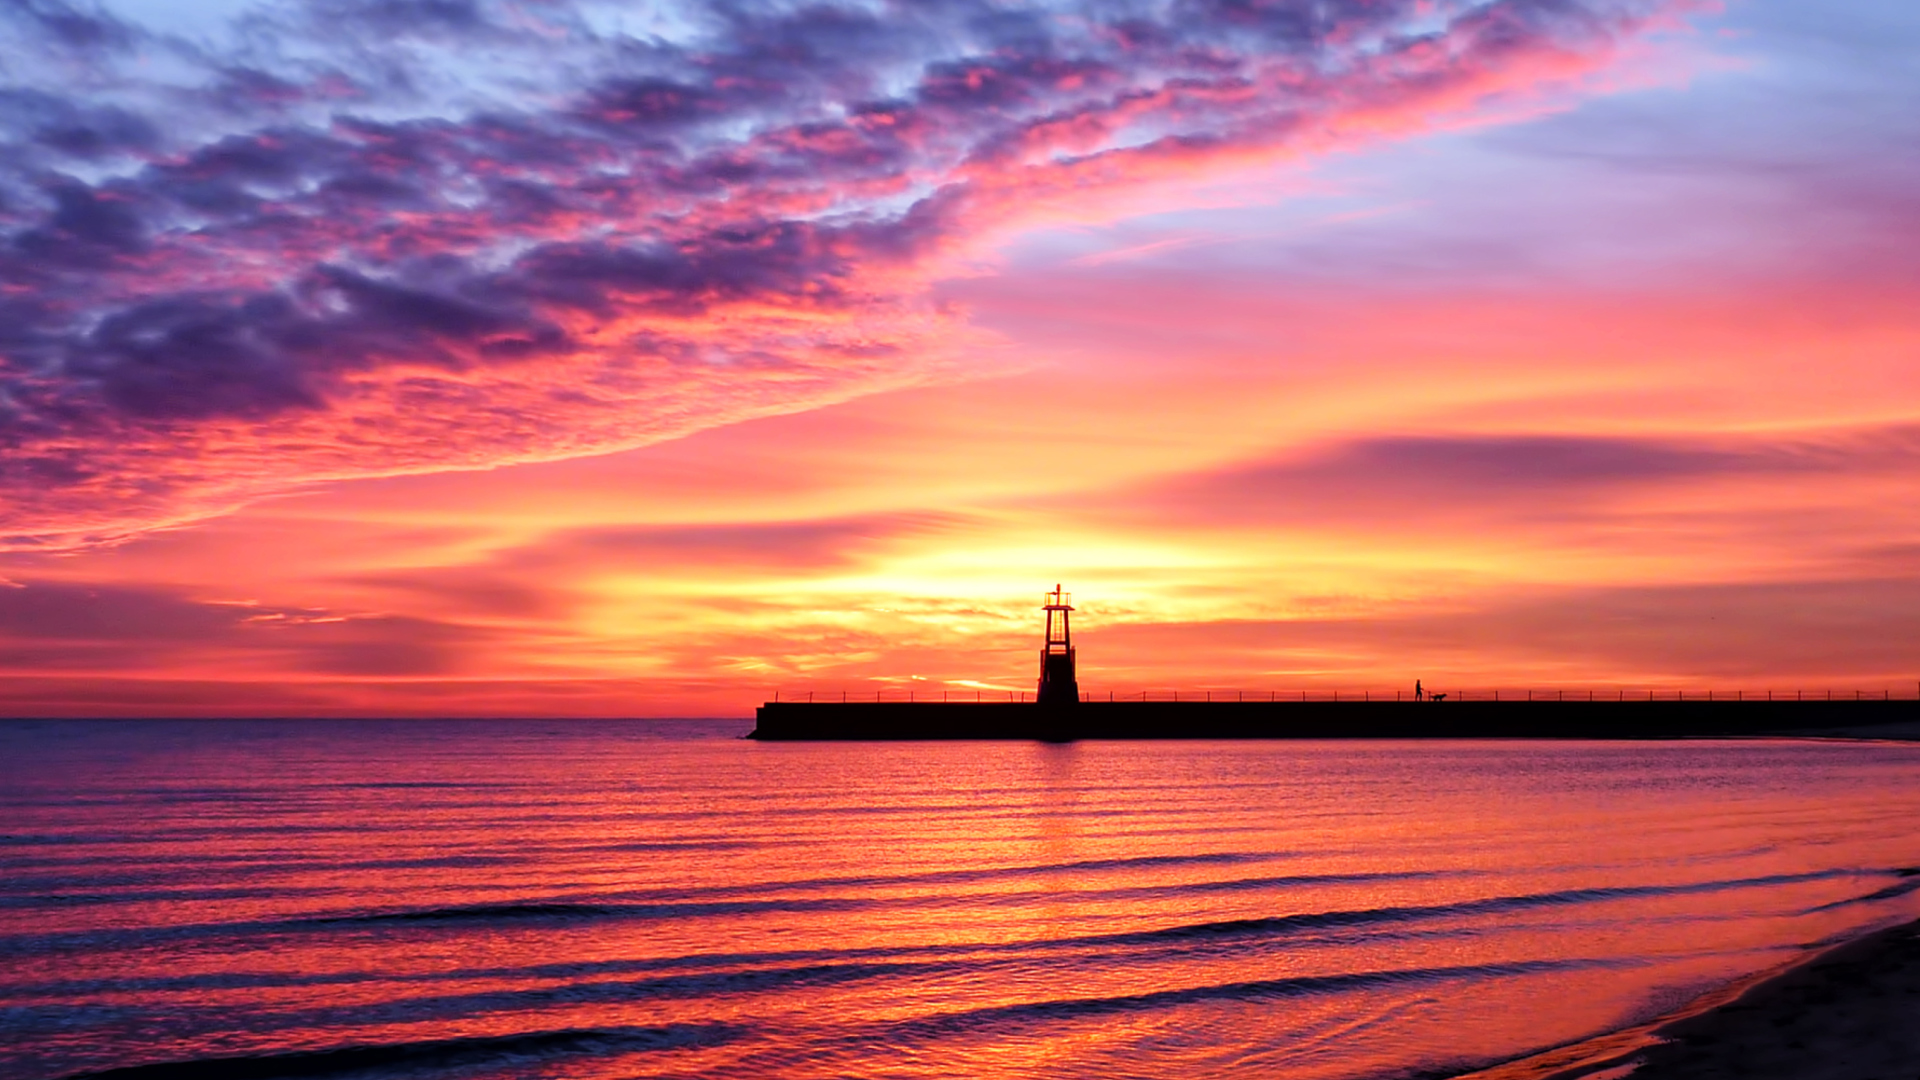 Lighthouse And Red Sunset Beach wallpaper 1920x1080